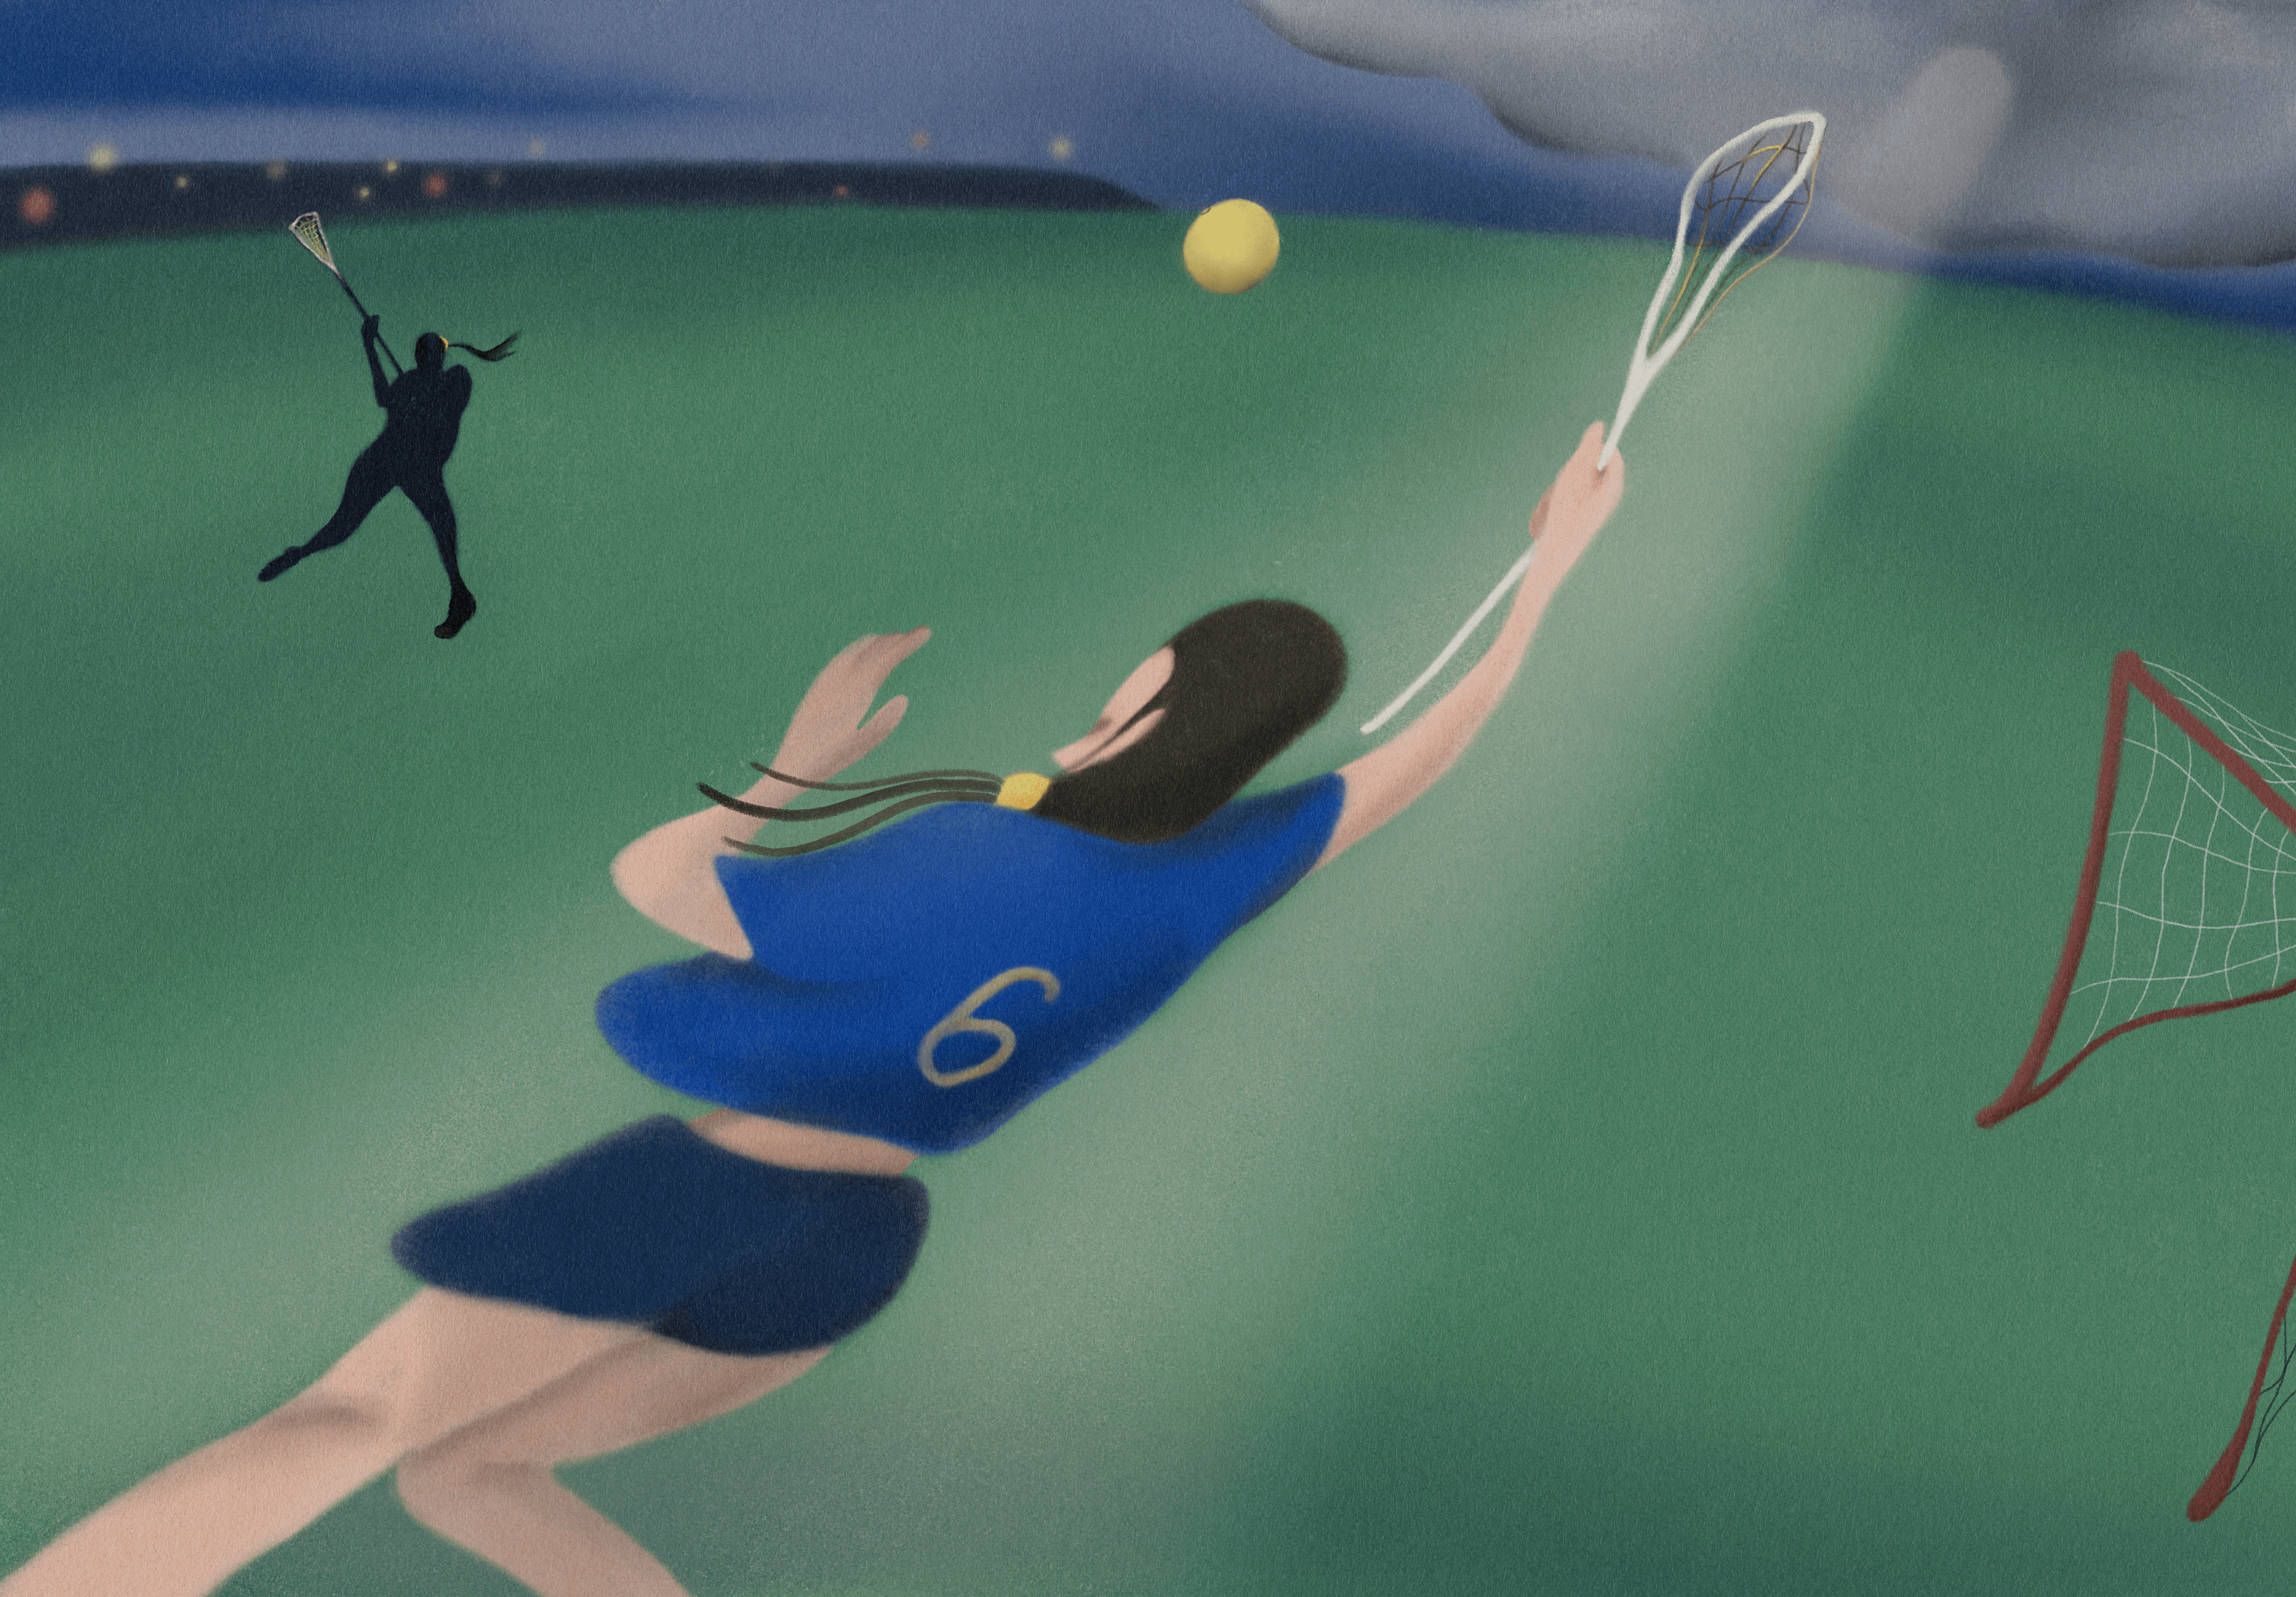 illustration of female lacrosse player in blue jersey with yellow "6" under a dark blue evening sky as she tries to catch a yellow ball headed toward her with her white lacrosse stick and stands near the netted goal